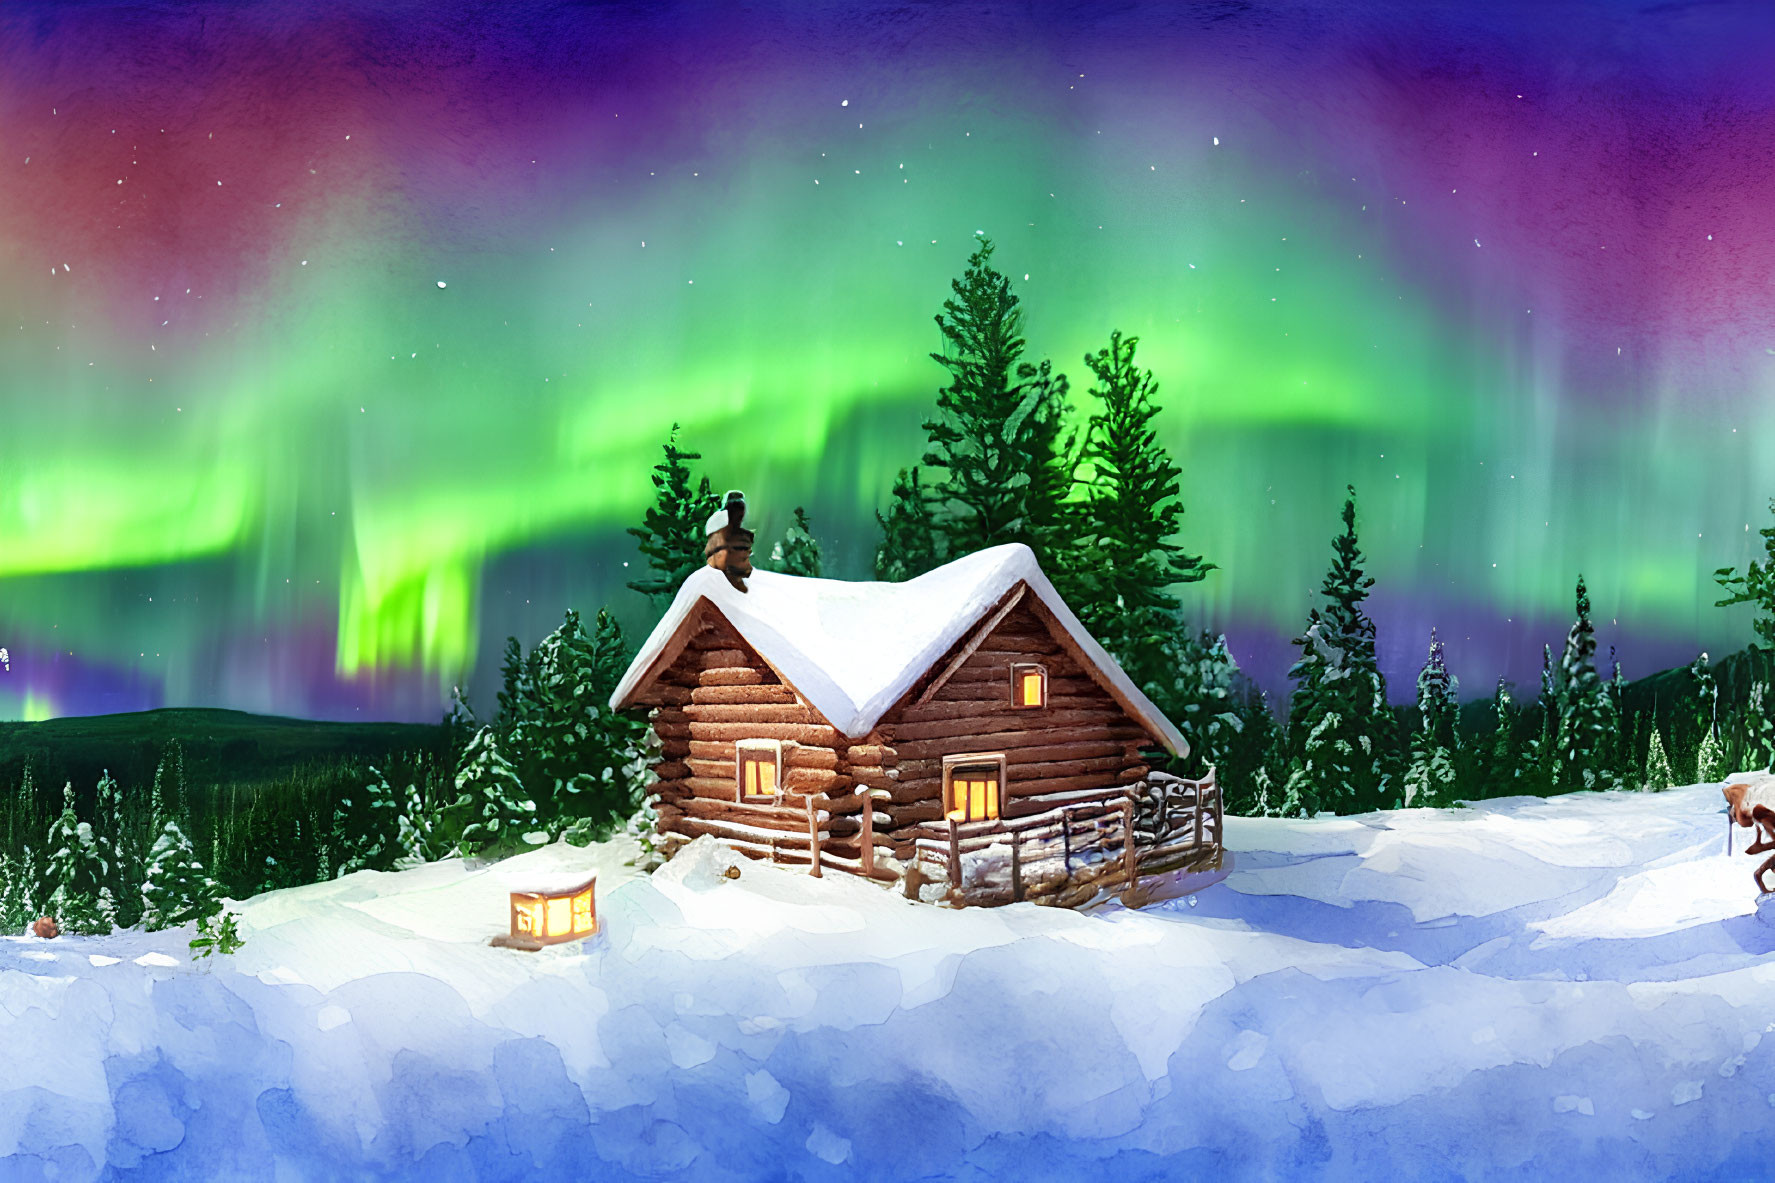 Snowy Landscape: Cozy Log Cabin and Northern Lights Display